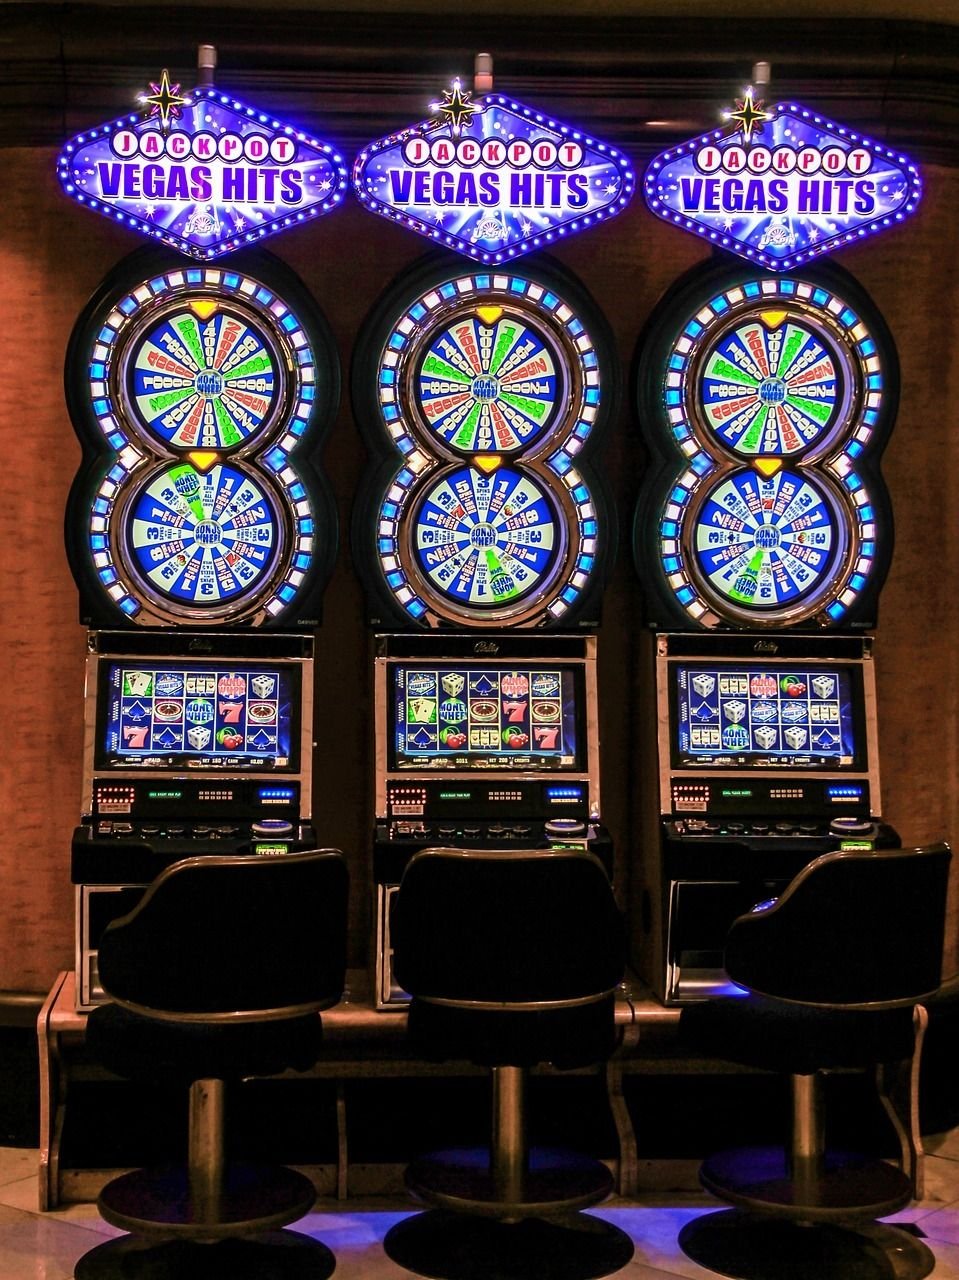 wheel of fortune type slot machines allow you to play side games